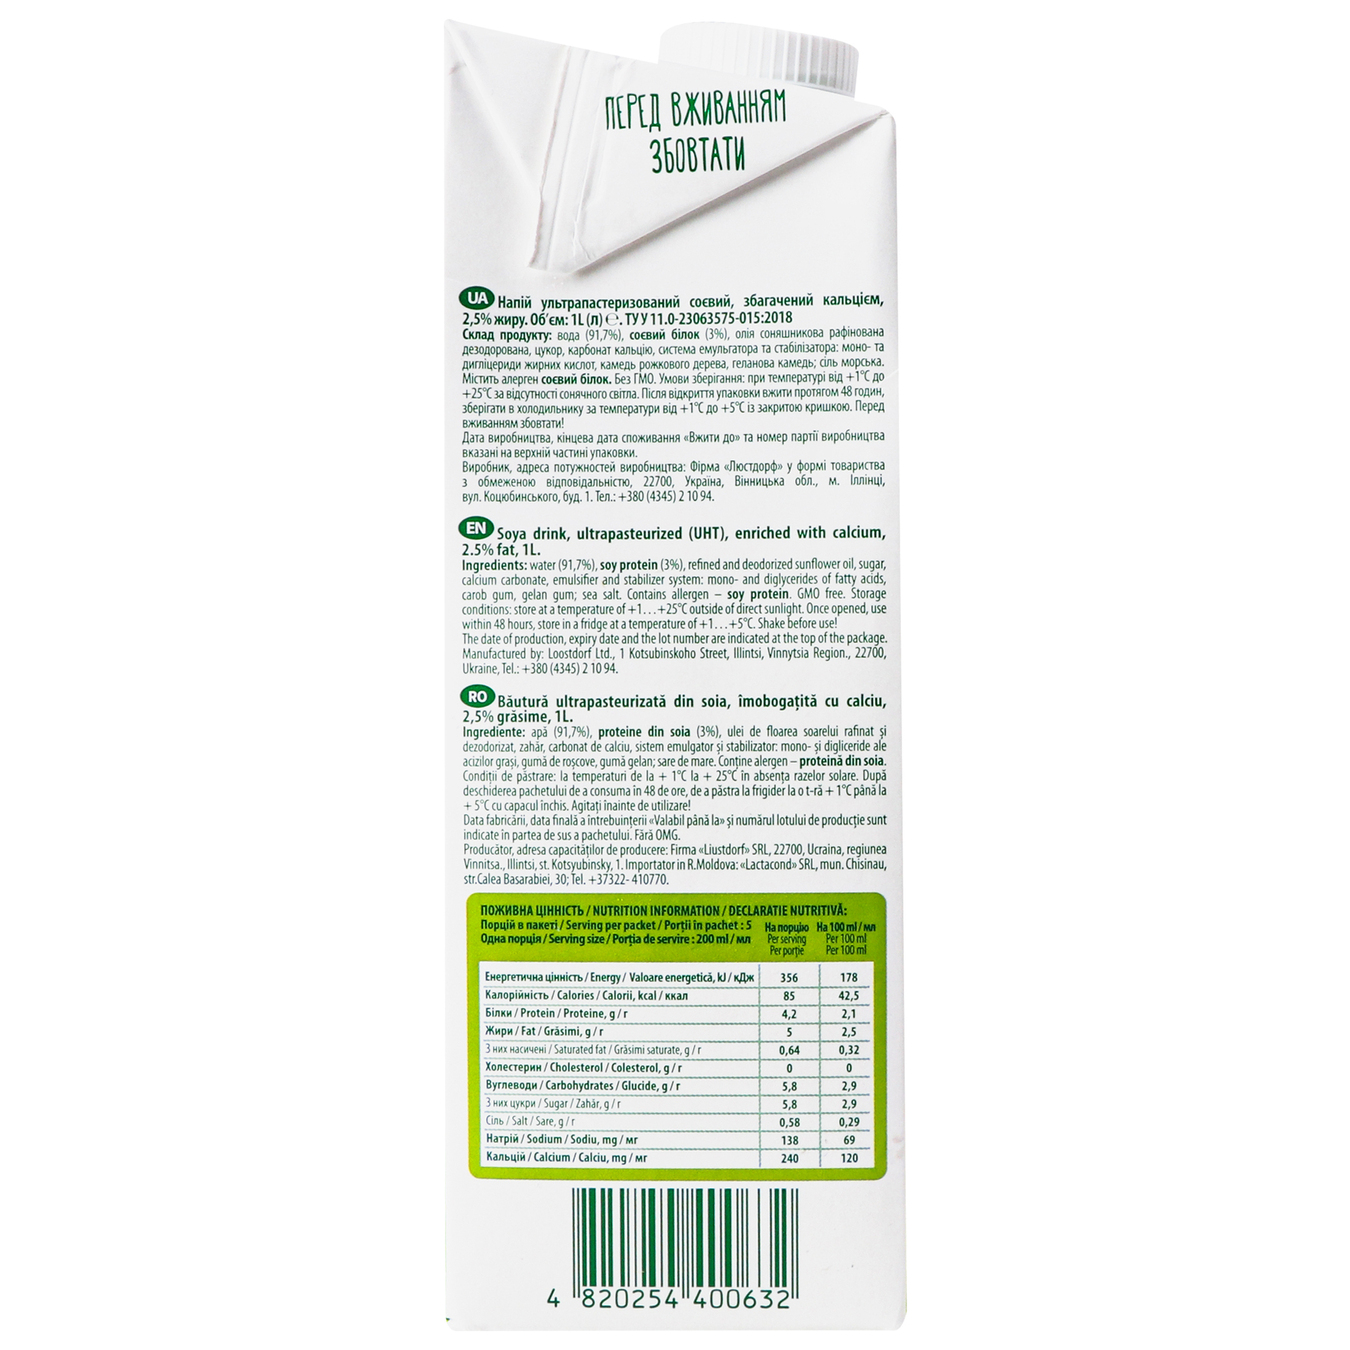 Green Smile ultra-pasteurized soy drink enriched with calcium 2.5% 1000g 5